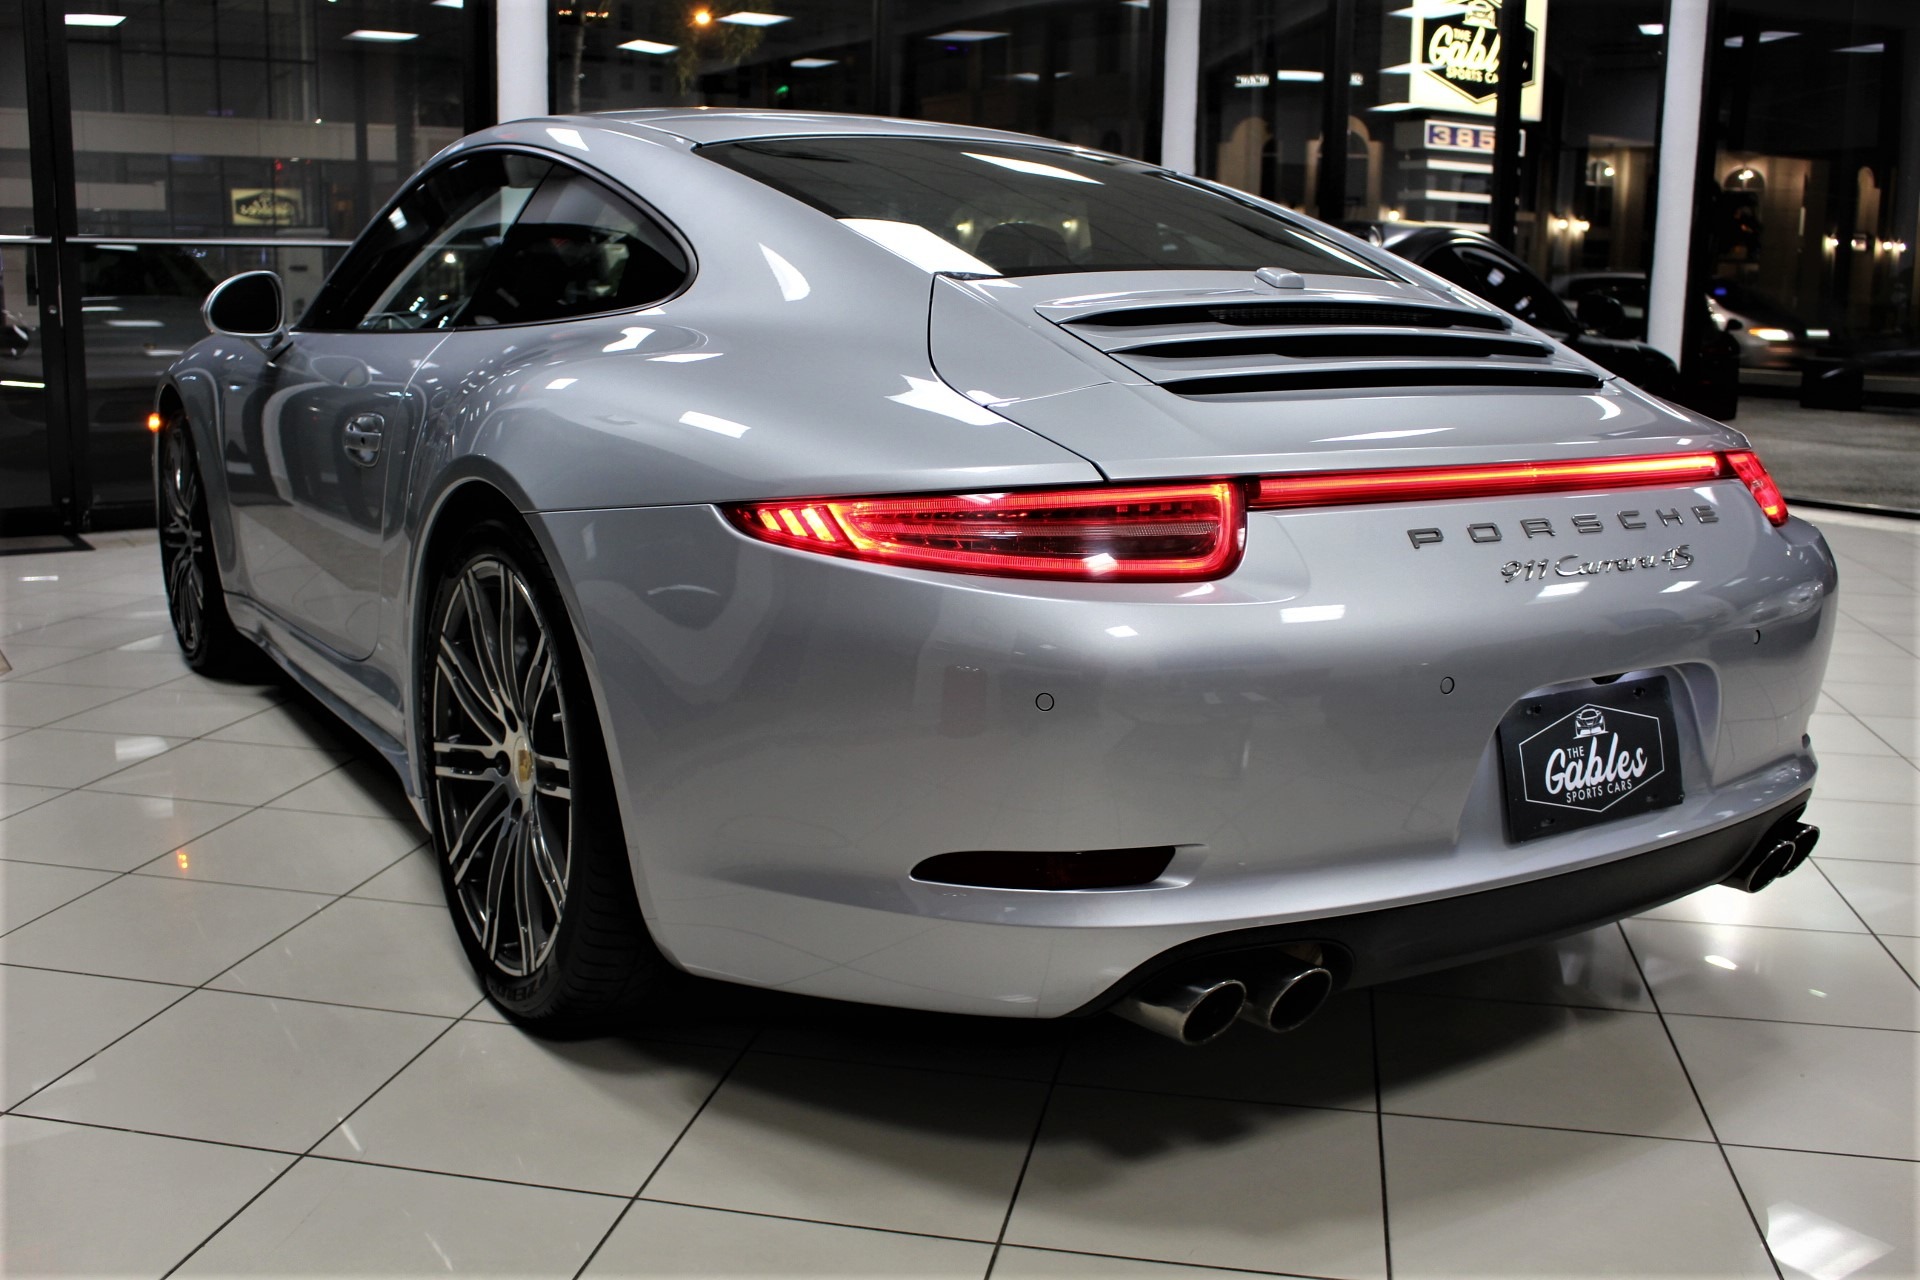 Used 2016 Porsche 911 Carrera 4S for sale Sold at The Gables Sports Cars in Miami FL 33146 1